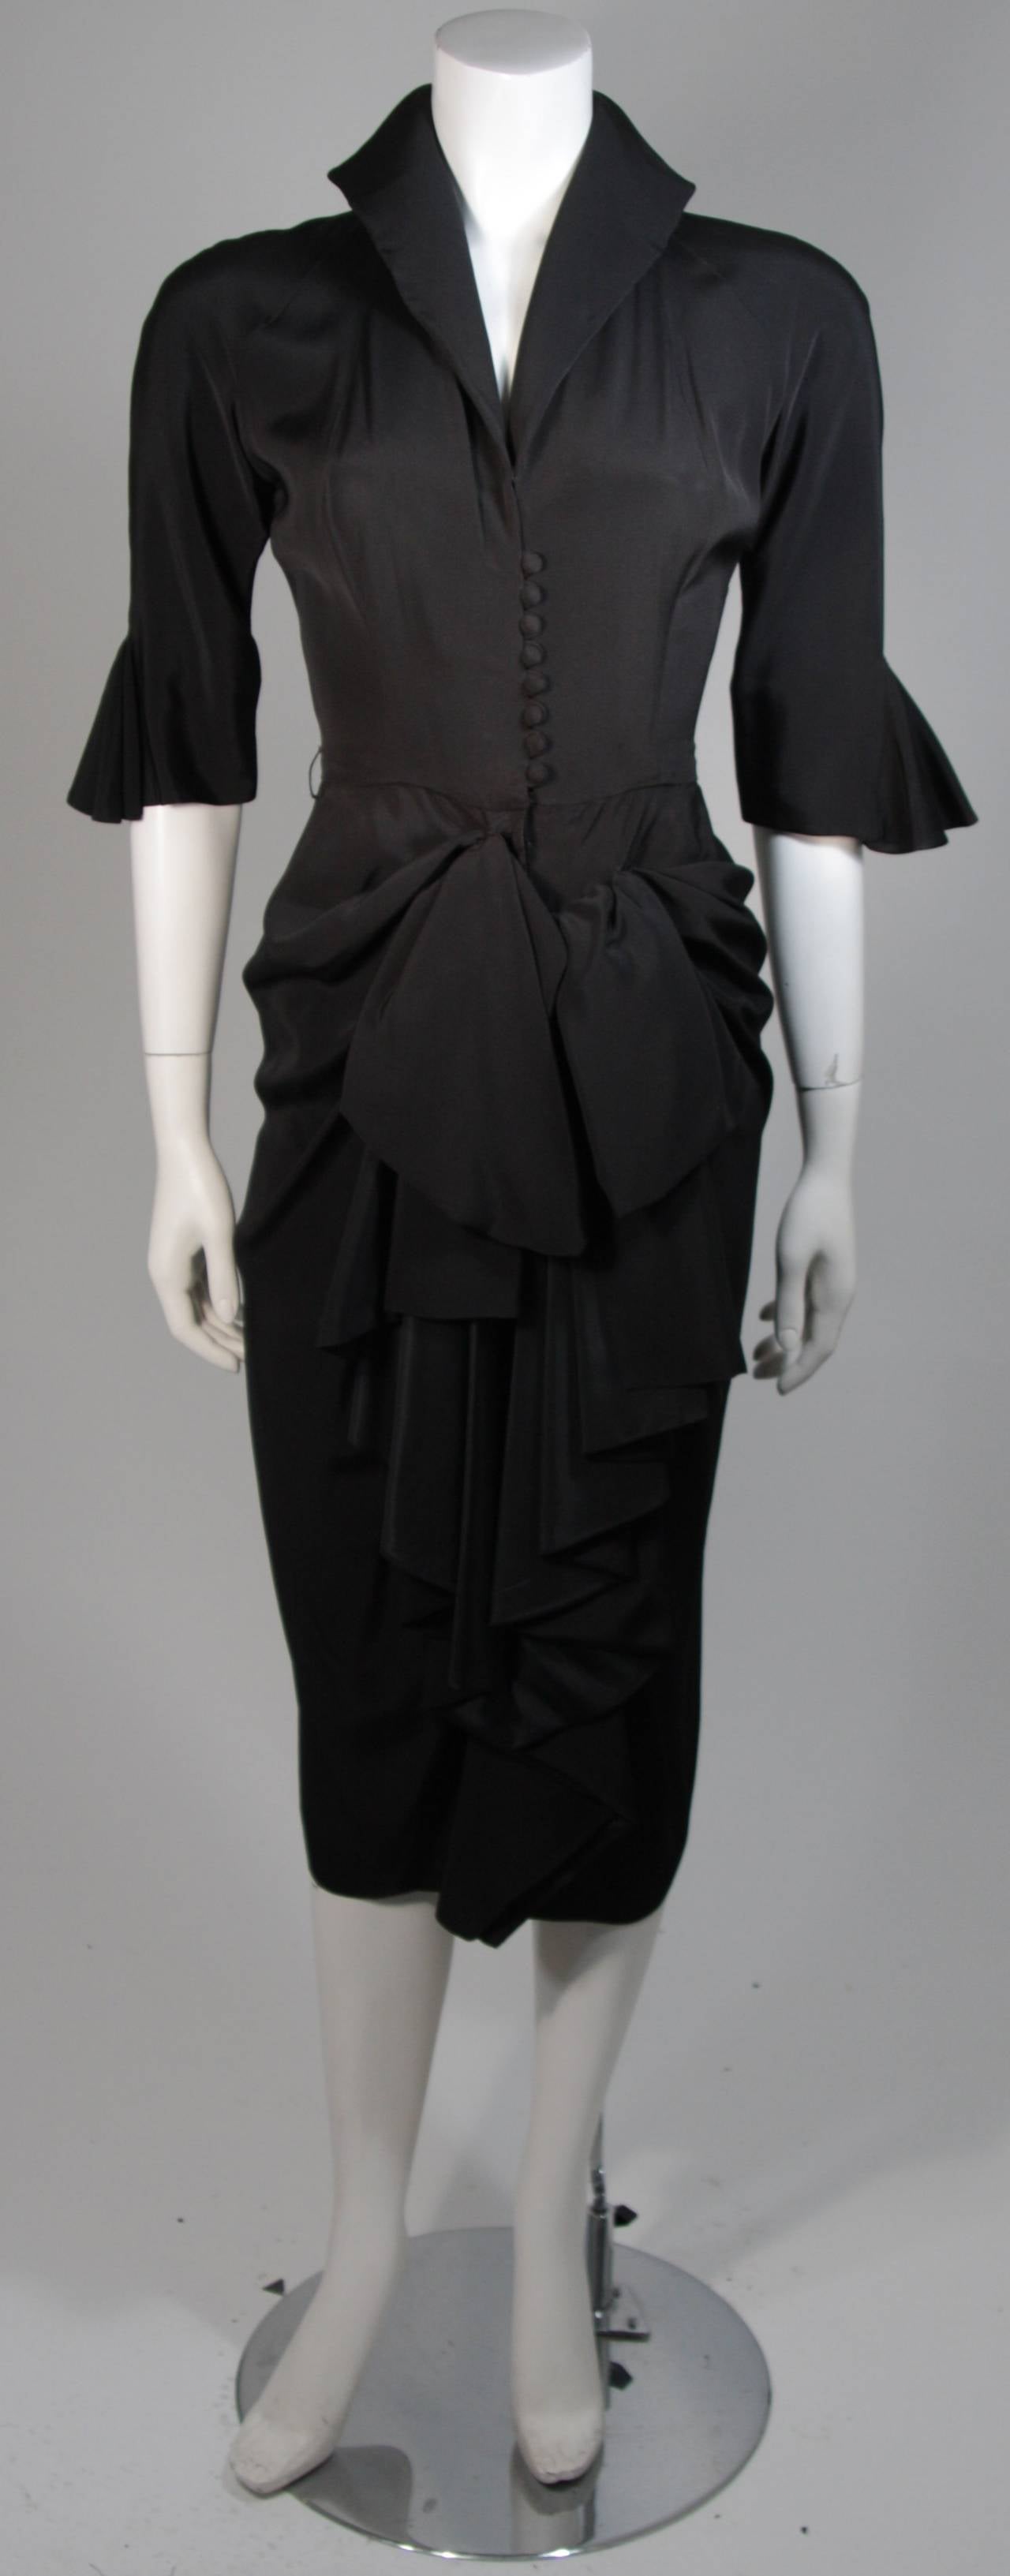 This Ceil Chapman cocktail dress is composed of a black rayon. The dress features center front button closures and a zipper. There is a center front draping at the waist. In excellent vintage condition. Beautiful for design inspiration. 

**Please